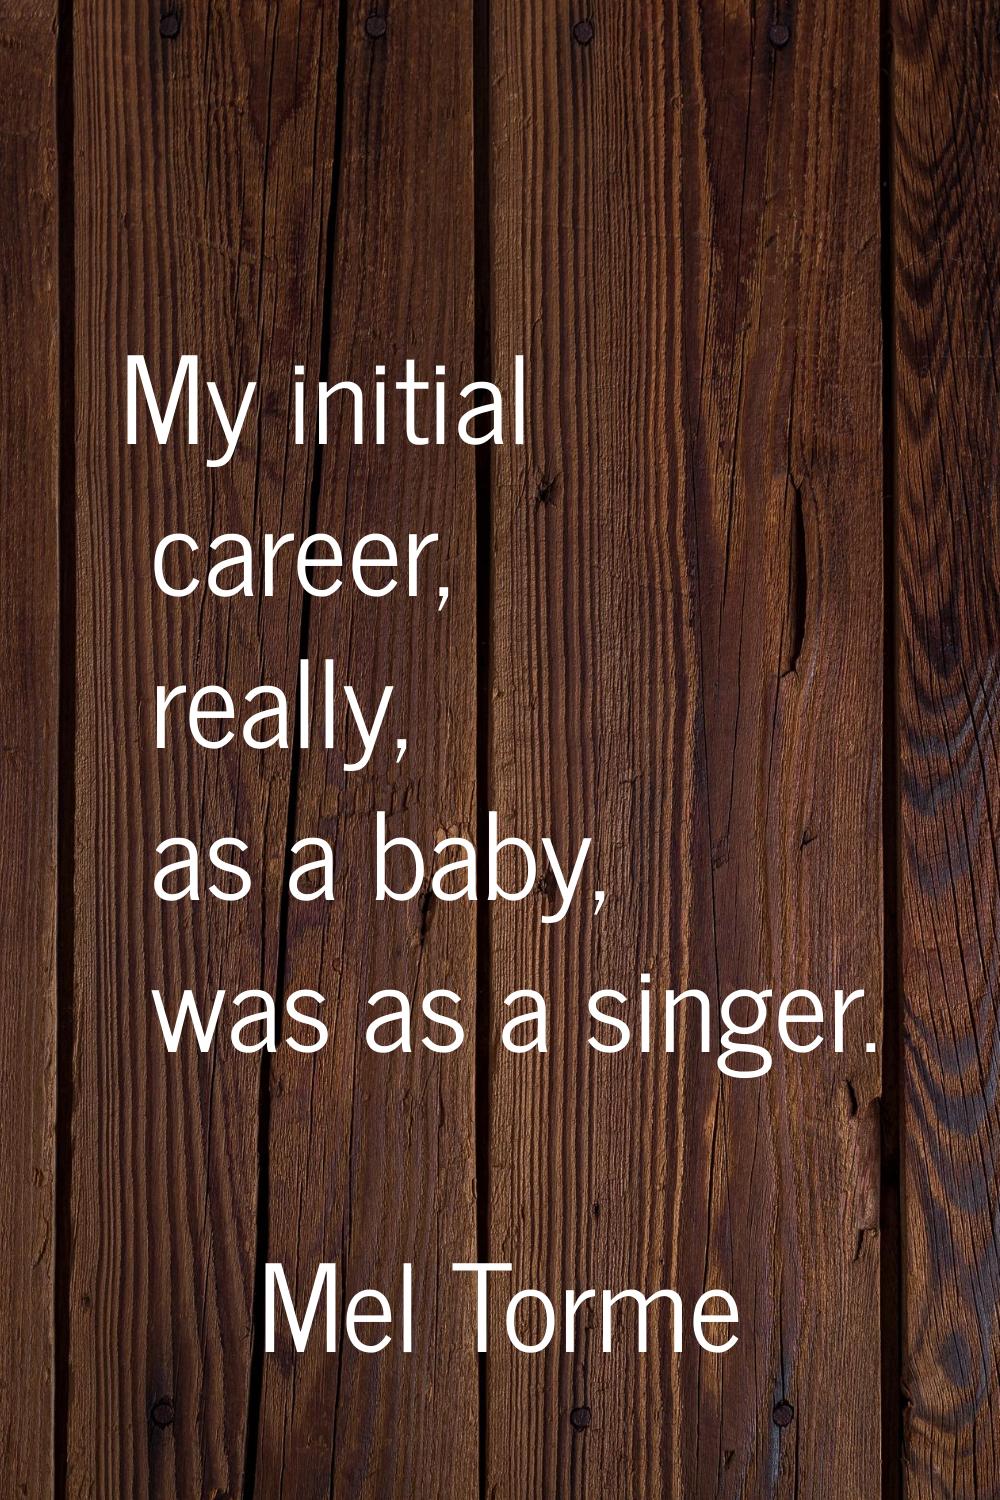 My initial career, really, as a baby, was as a singer.